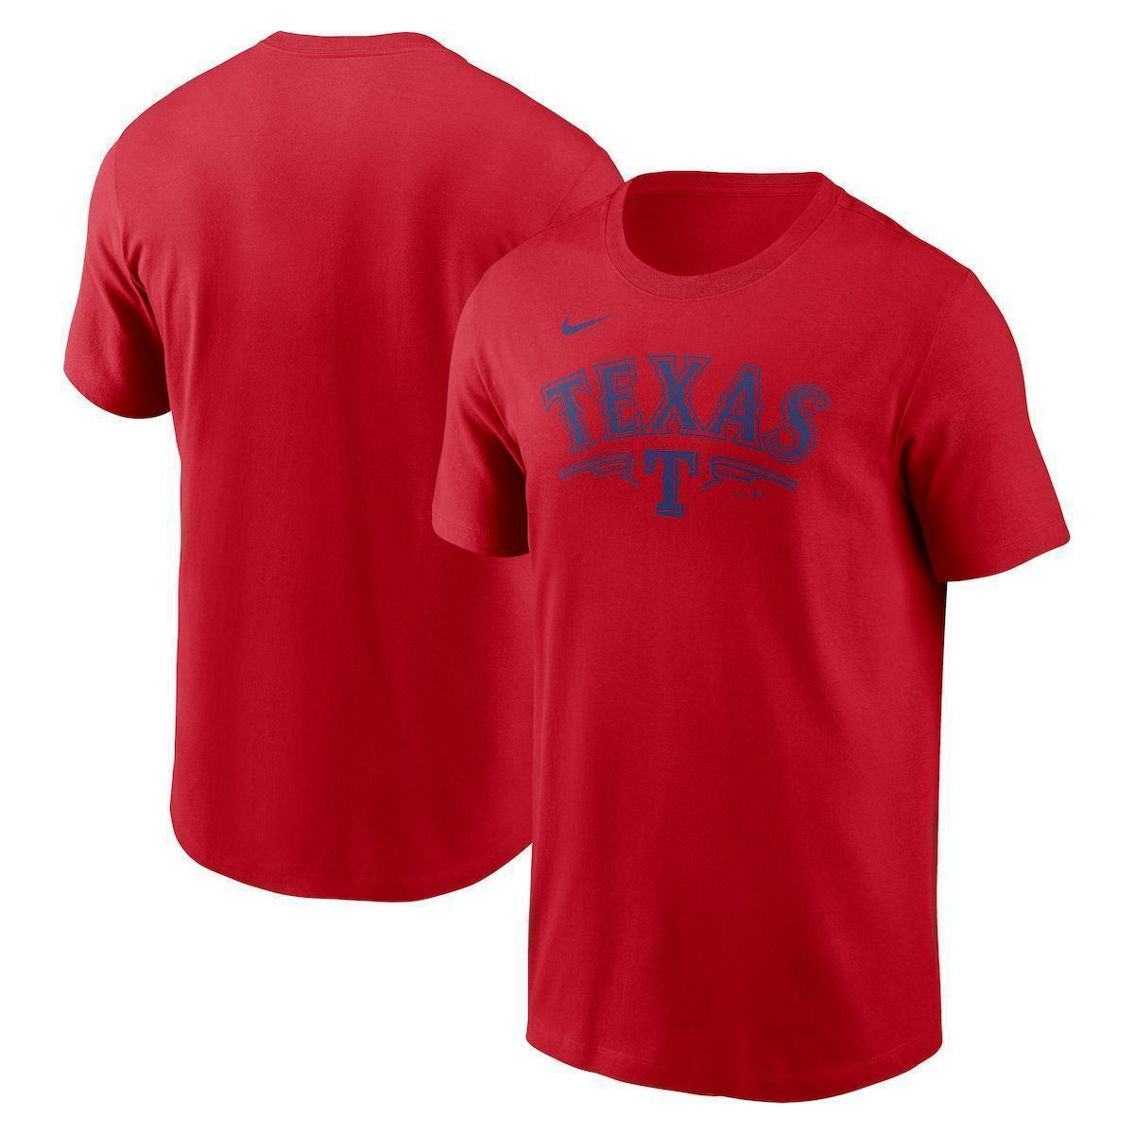 Nike Men's Red Texas Rangers Local Team T-Shirt - Image 2 of 4